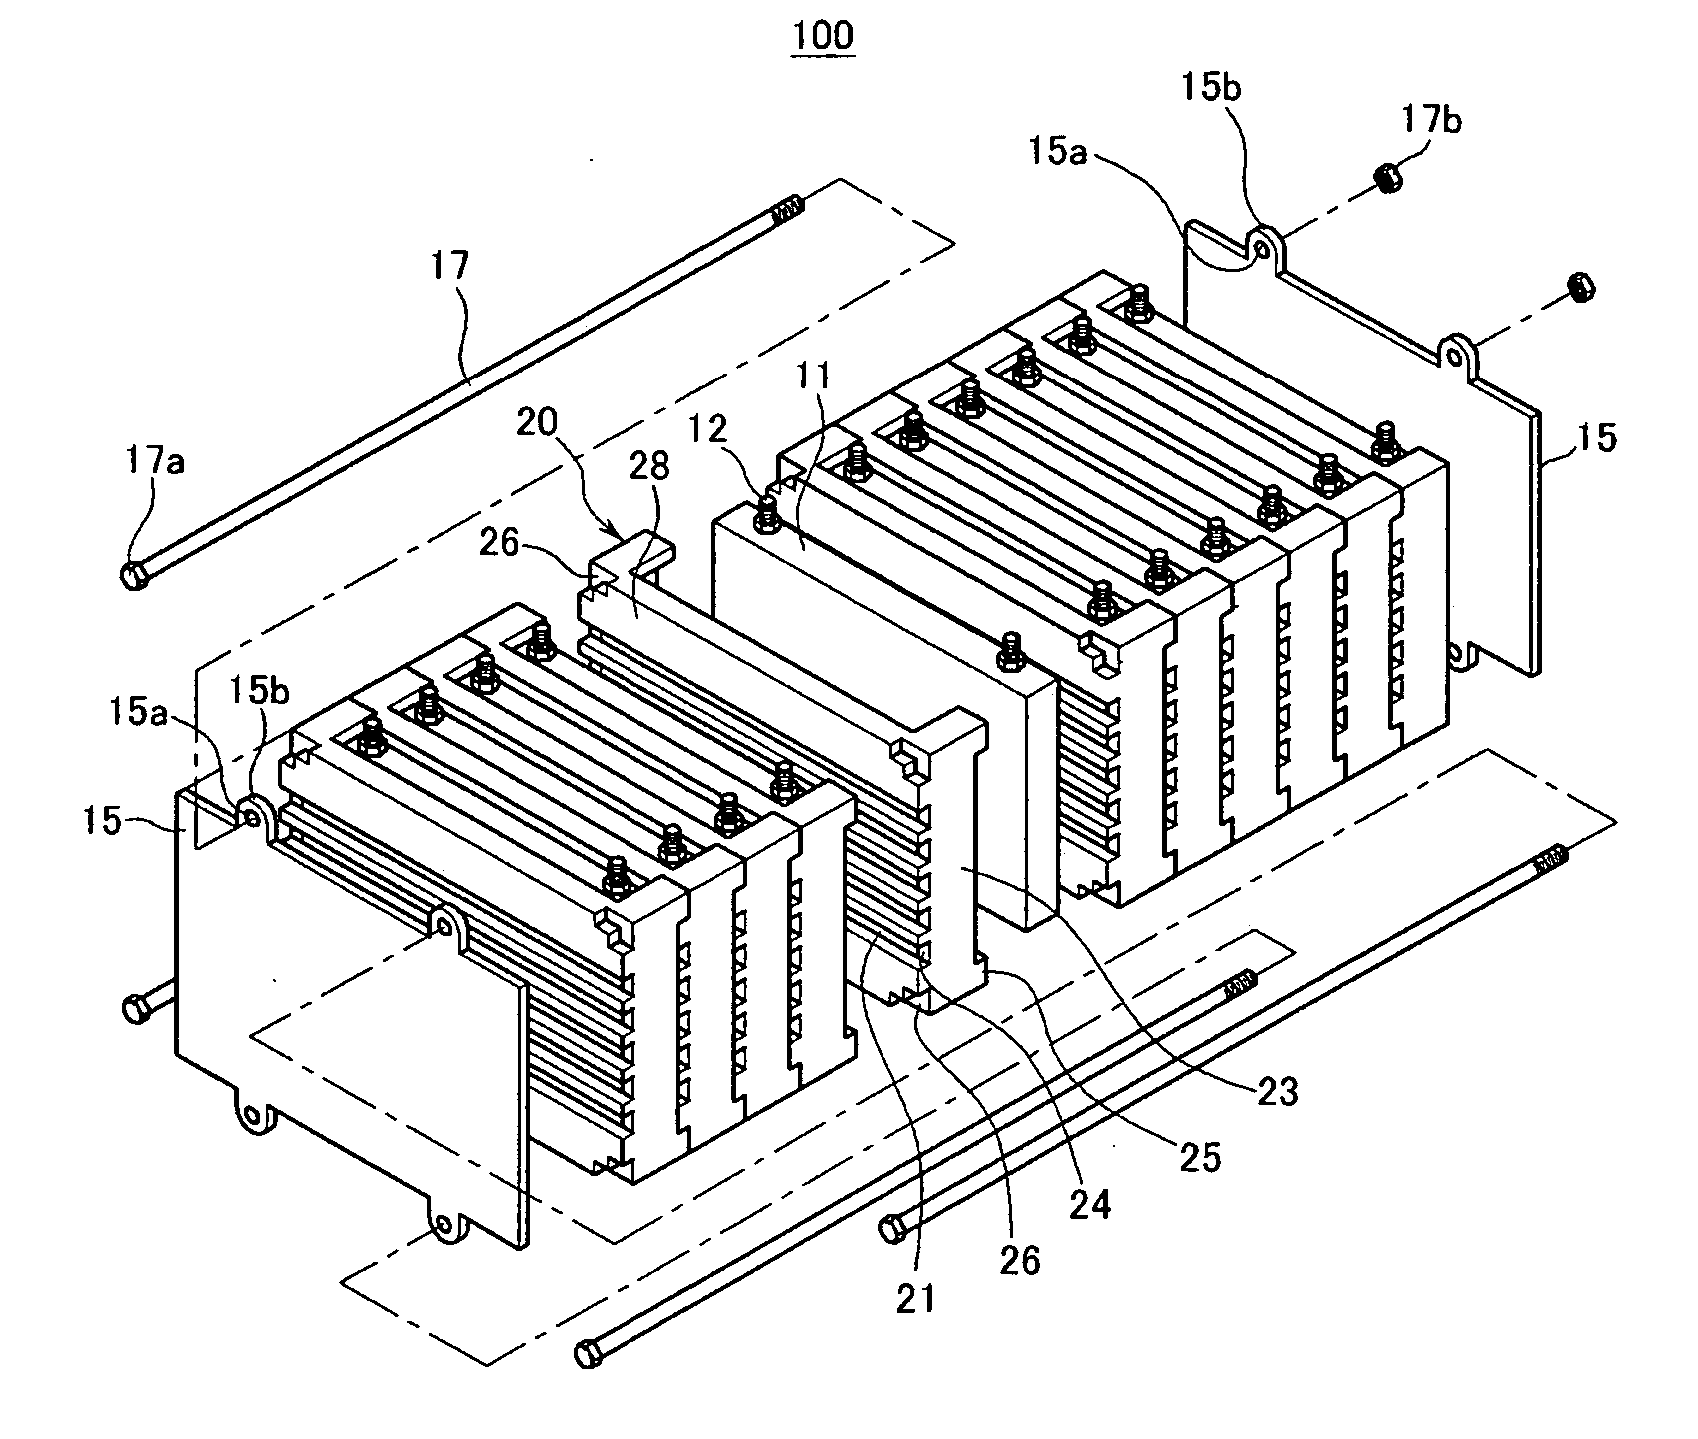 Battery module with improved cell barrier between unit cells